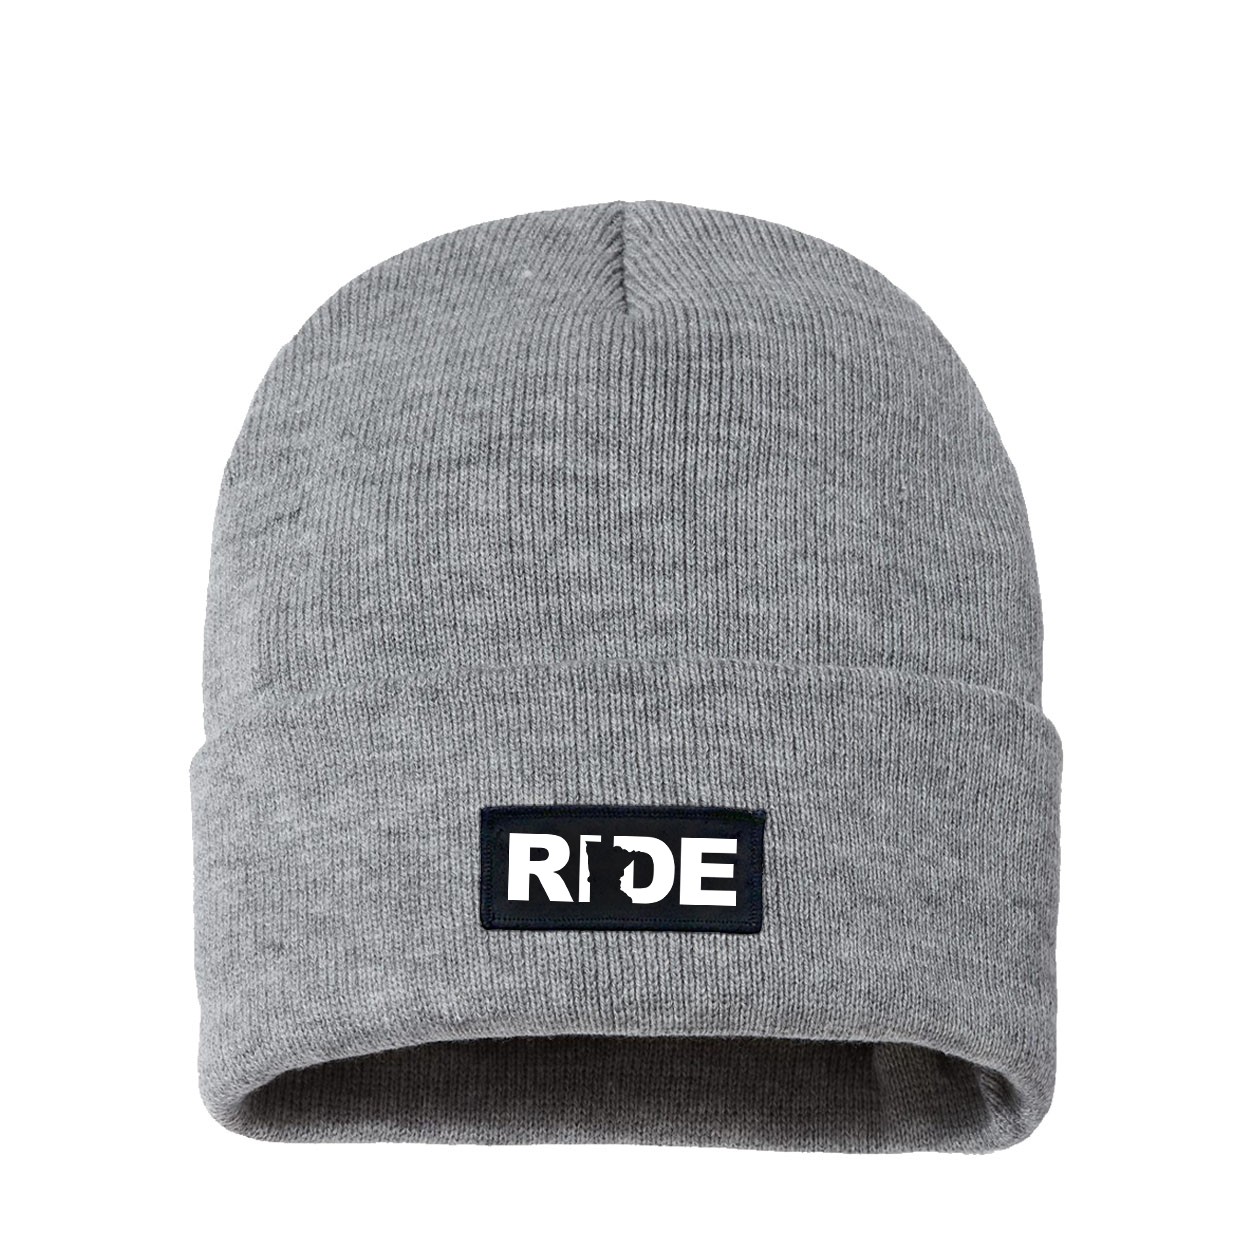 Ride Minnesota Night Out Woven Patch Night Out Sherpa Lined Cuffed Beanie (White Logo)